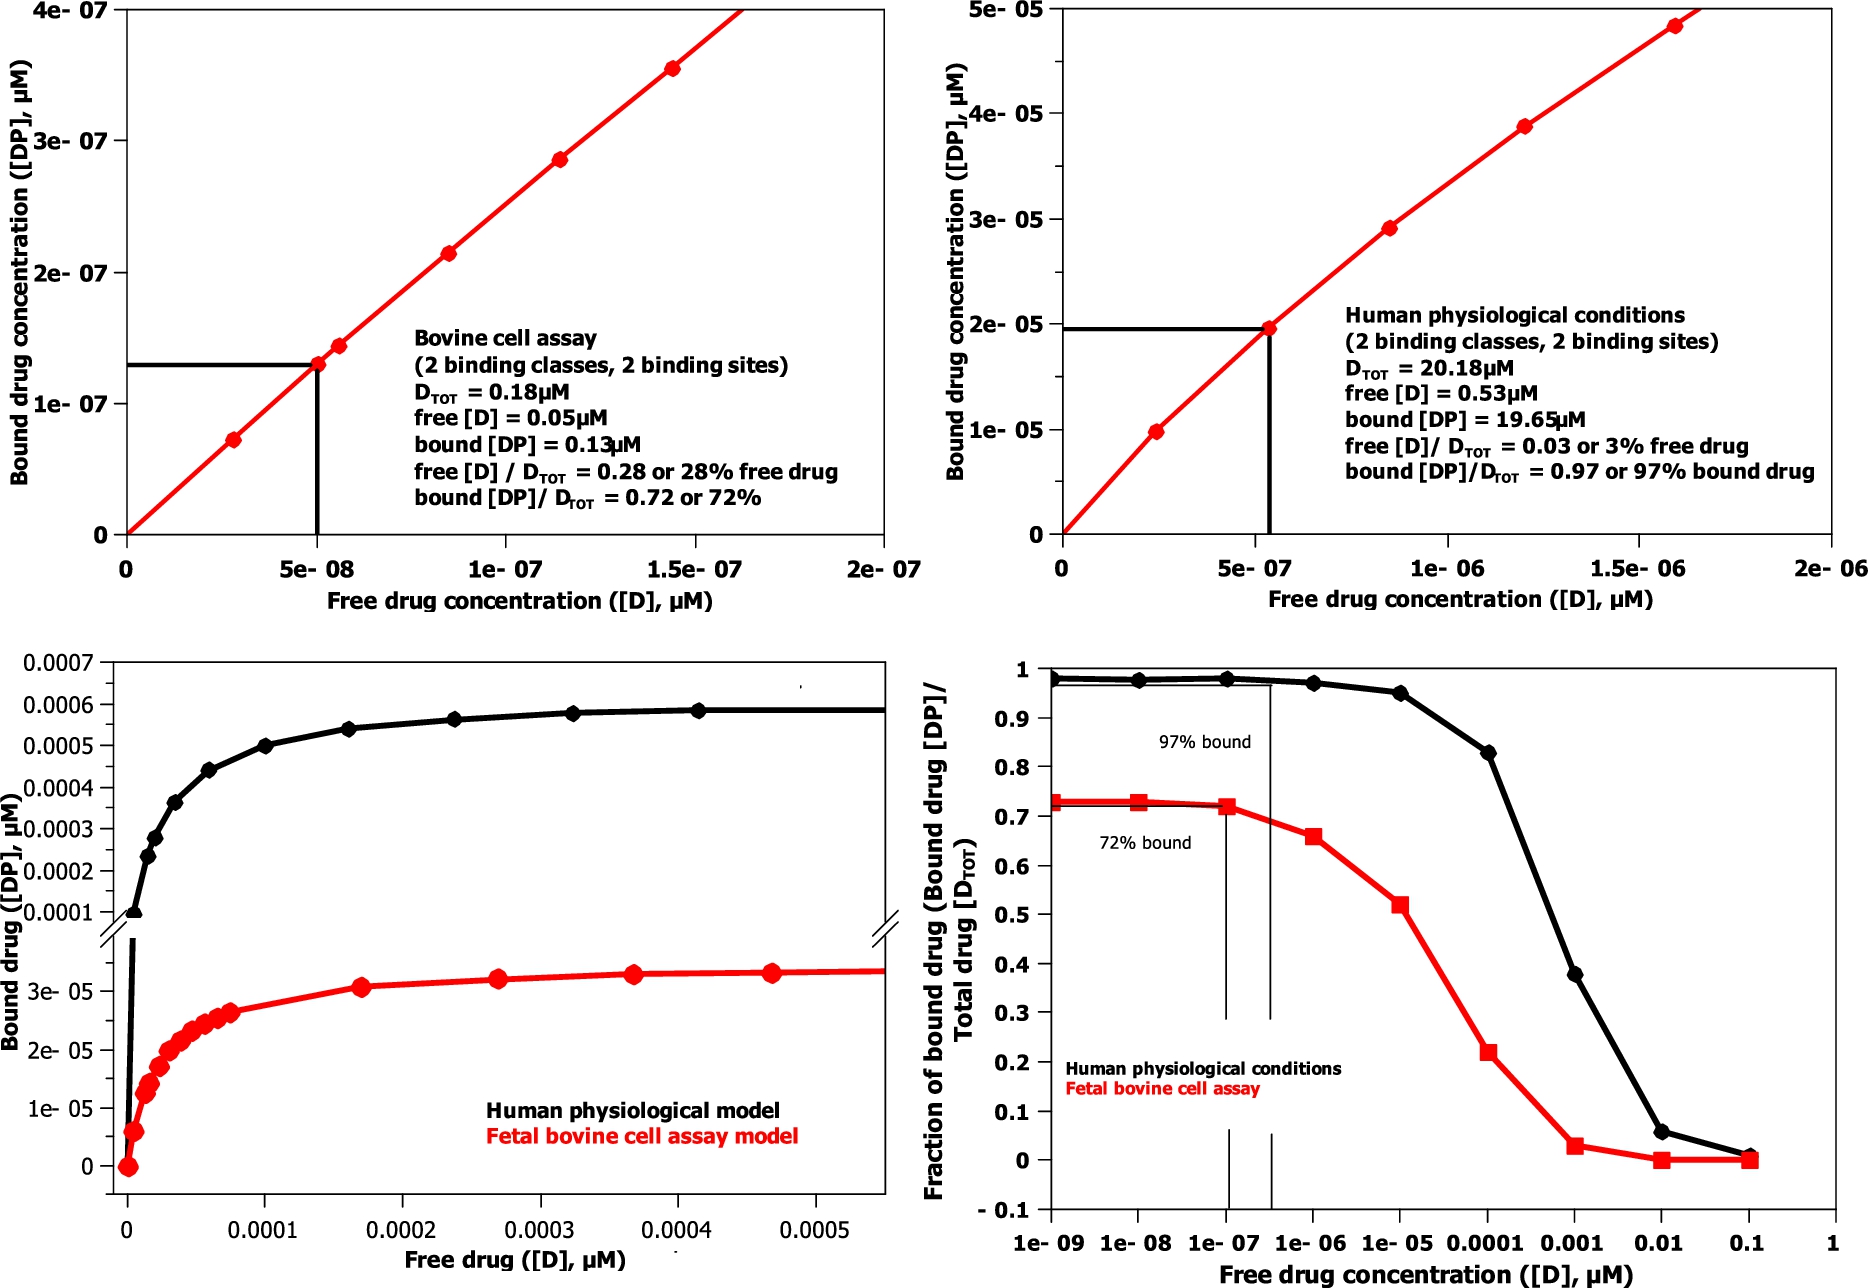 The model binding curves (bottom left and magnified top left and right) and model log binding curves (bottom right) for the binding models shown in Table 3. Fetal bovine serum cell assay (red trace) and human physiological conditions (black trace). The human and bovine cell assays use the albumin and AGP concentrations described in Table 1.